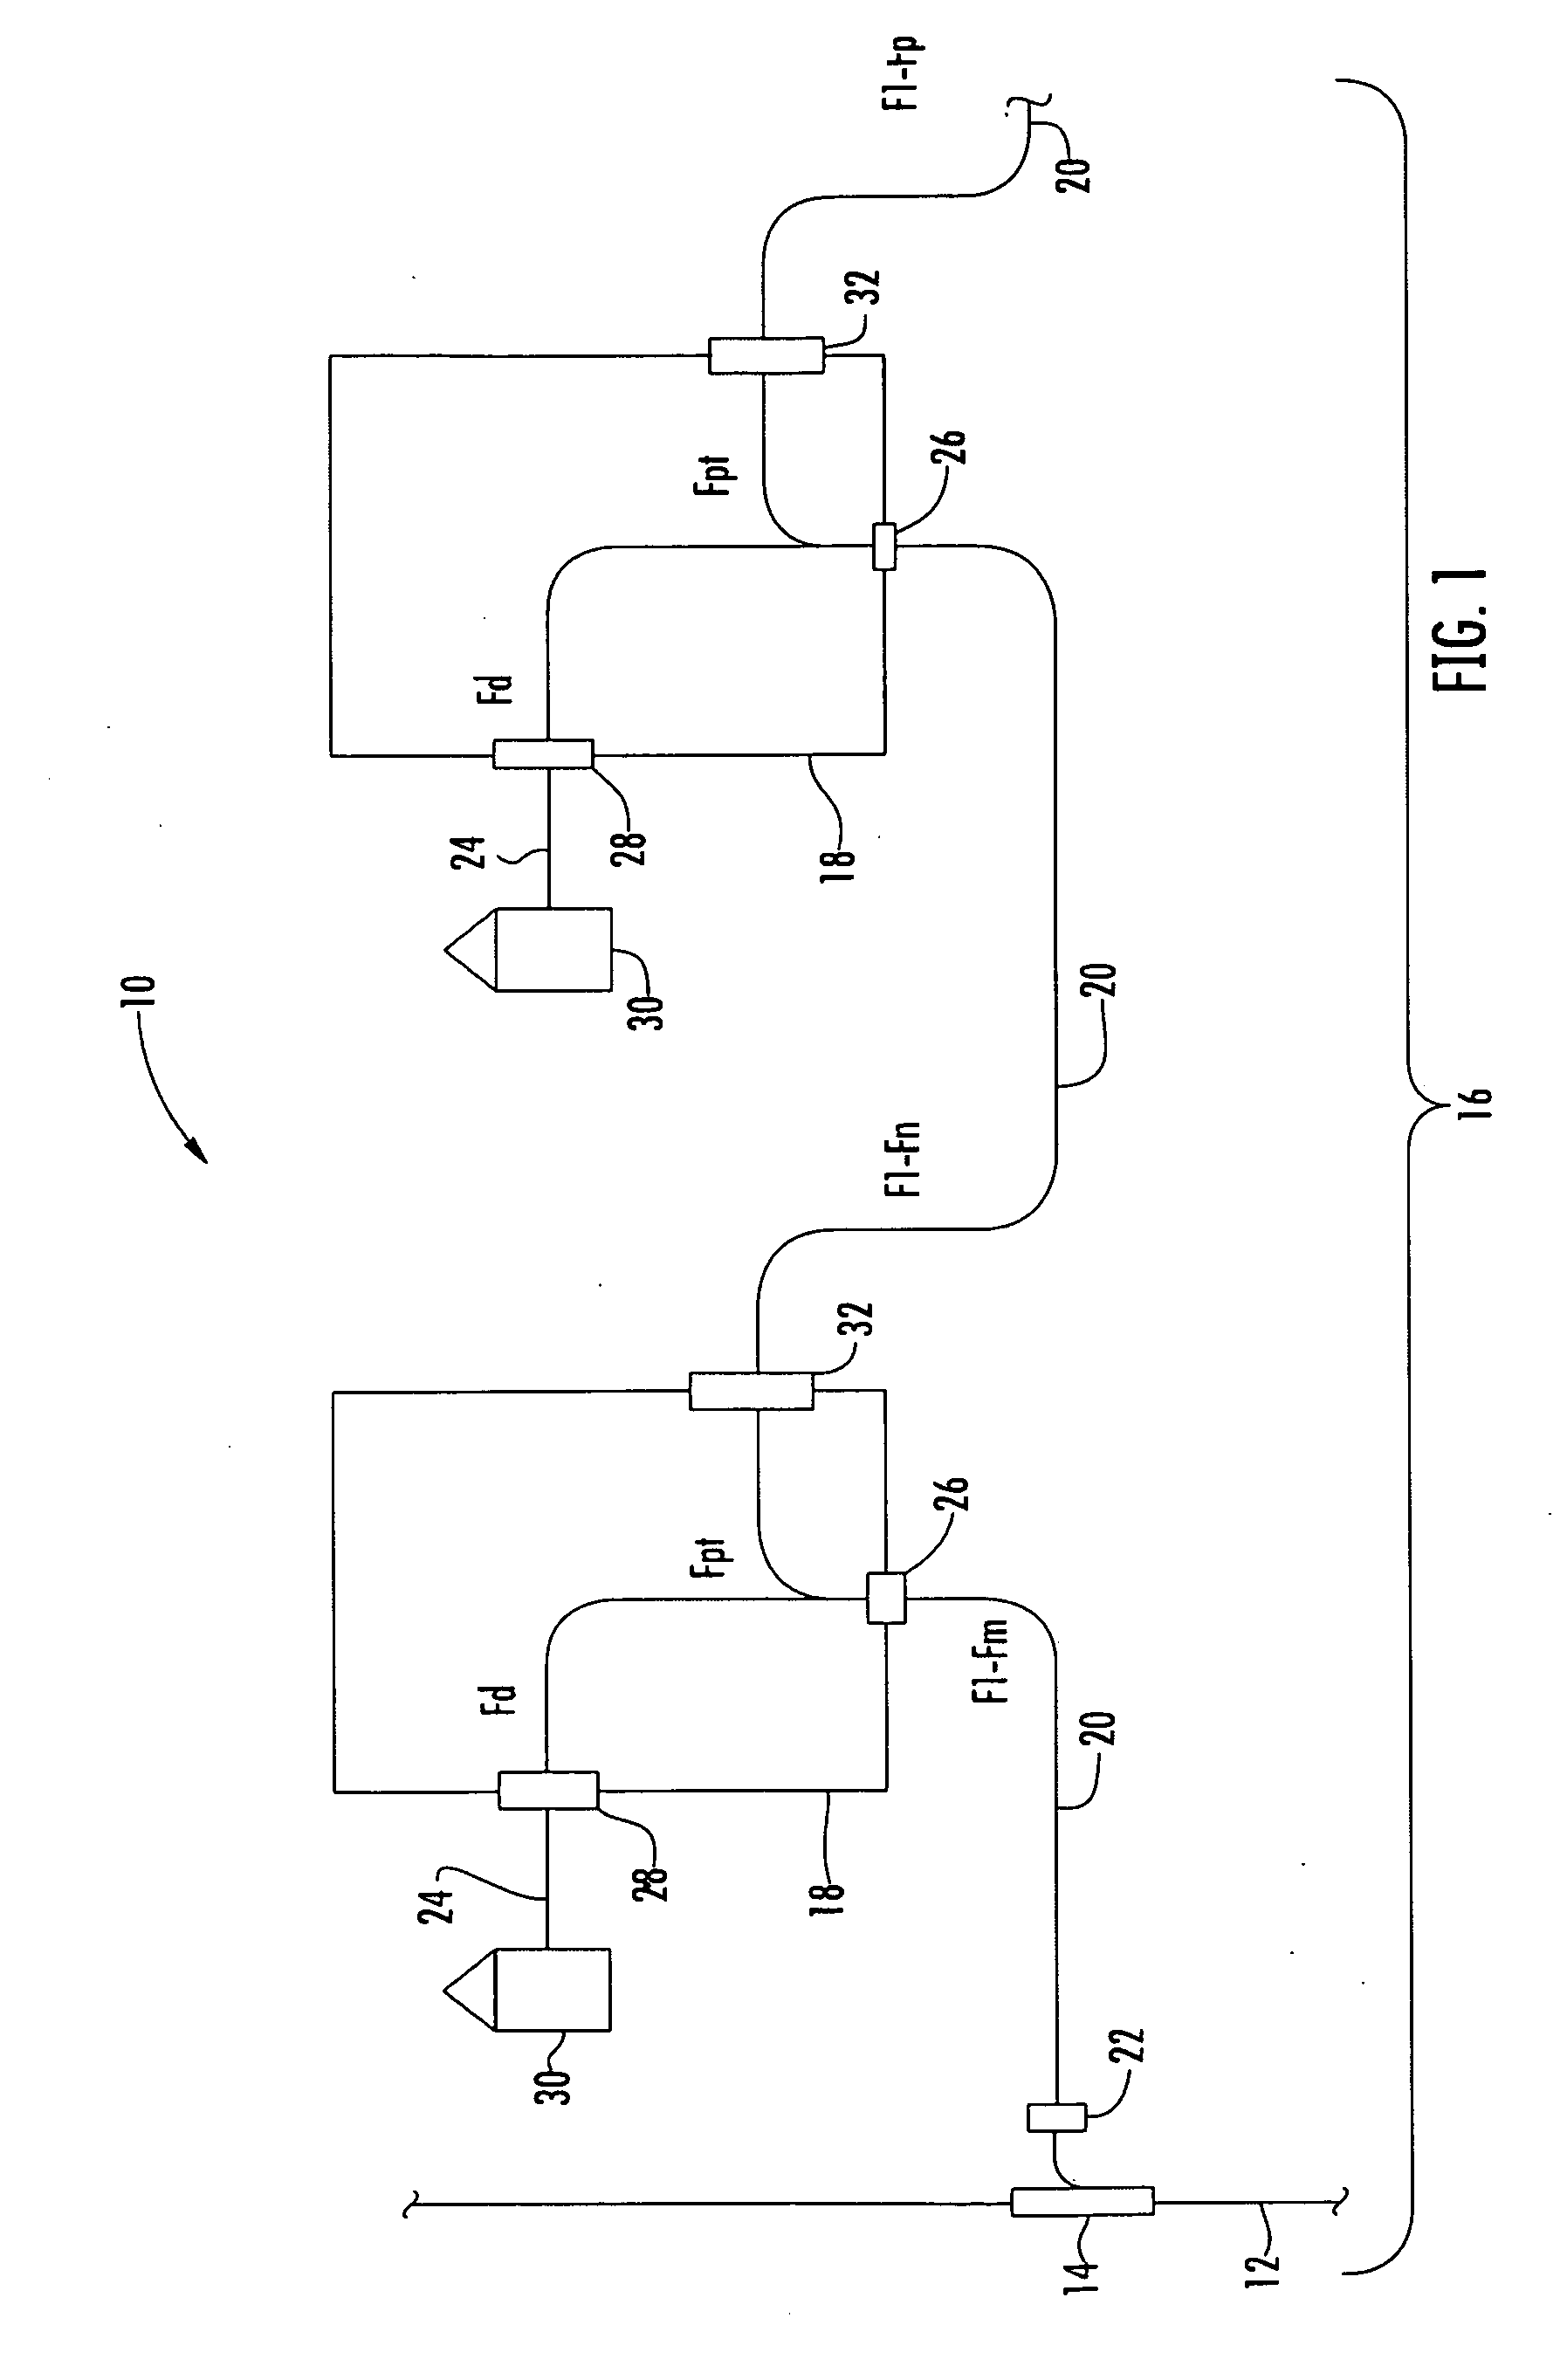 Methods of Port Mapping in Fiber Optic Network Devices